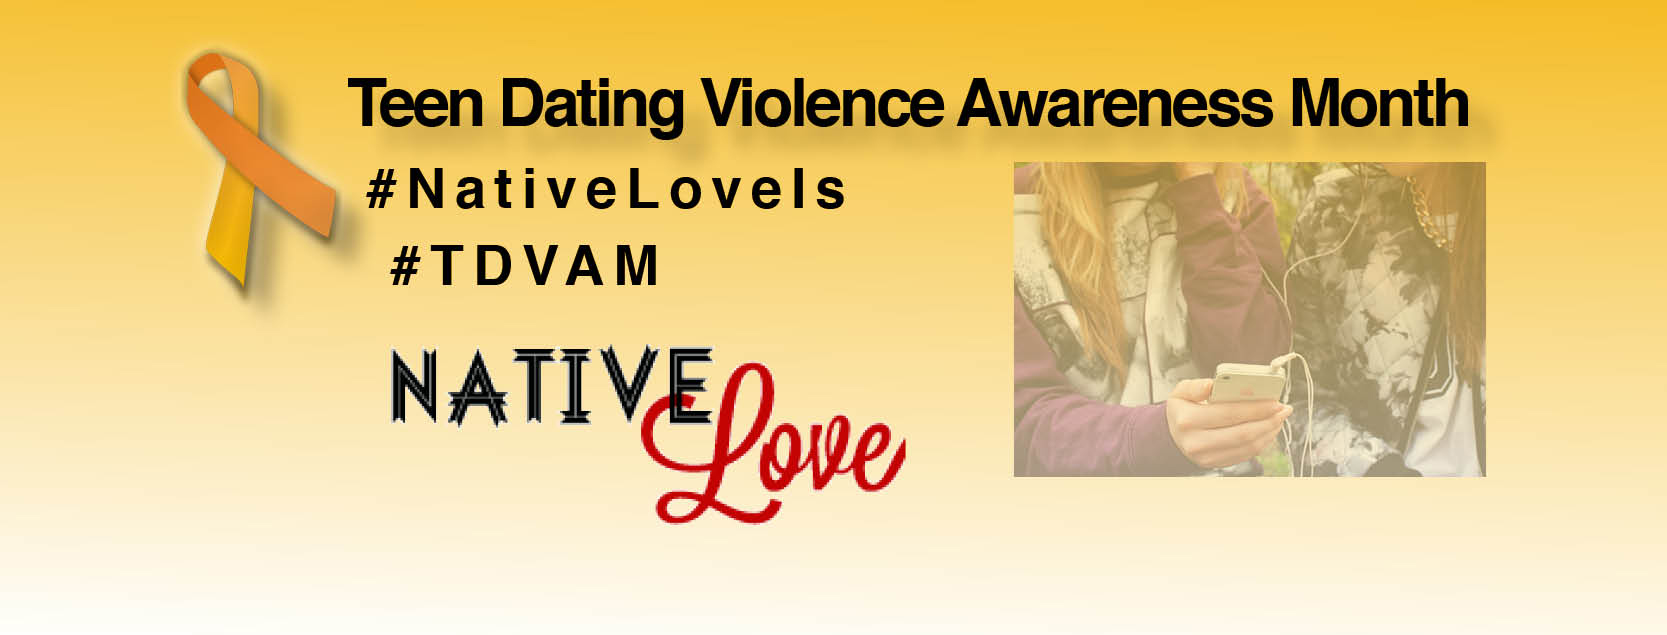 2018 Teen Dating Violence Awareness Month Resource Page